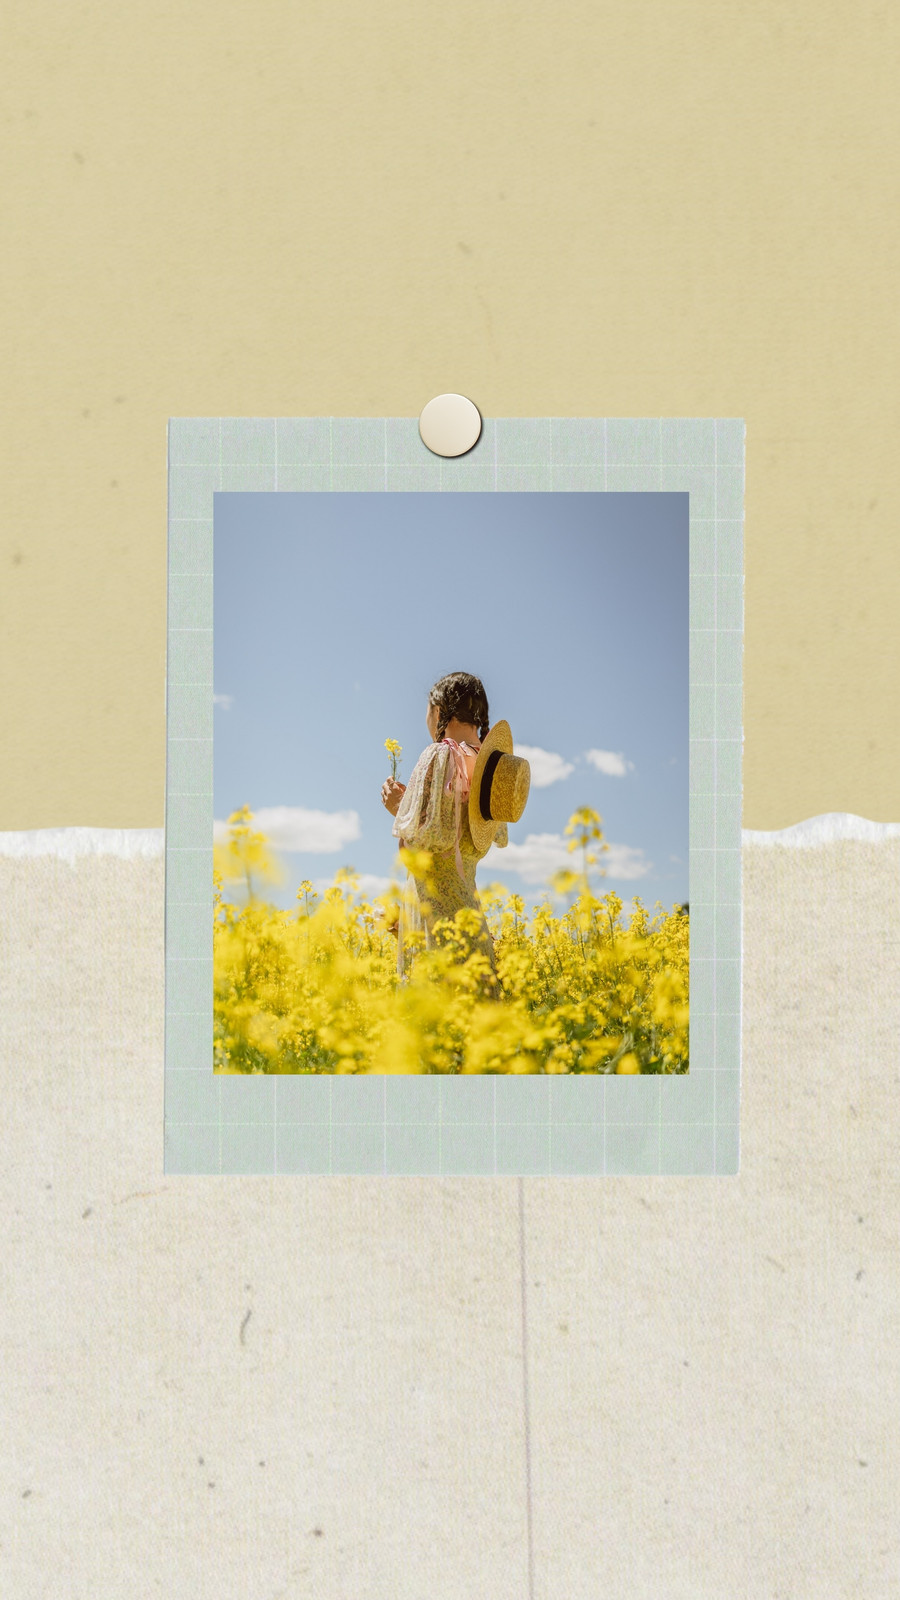 40 Yellow Aesthetic Wallpaper Options For iPhone 